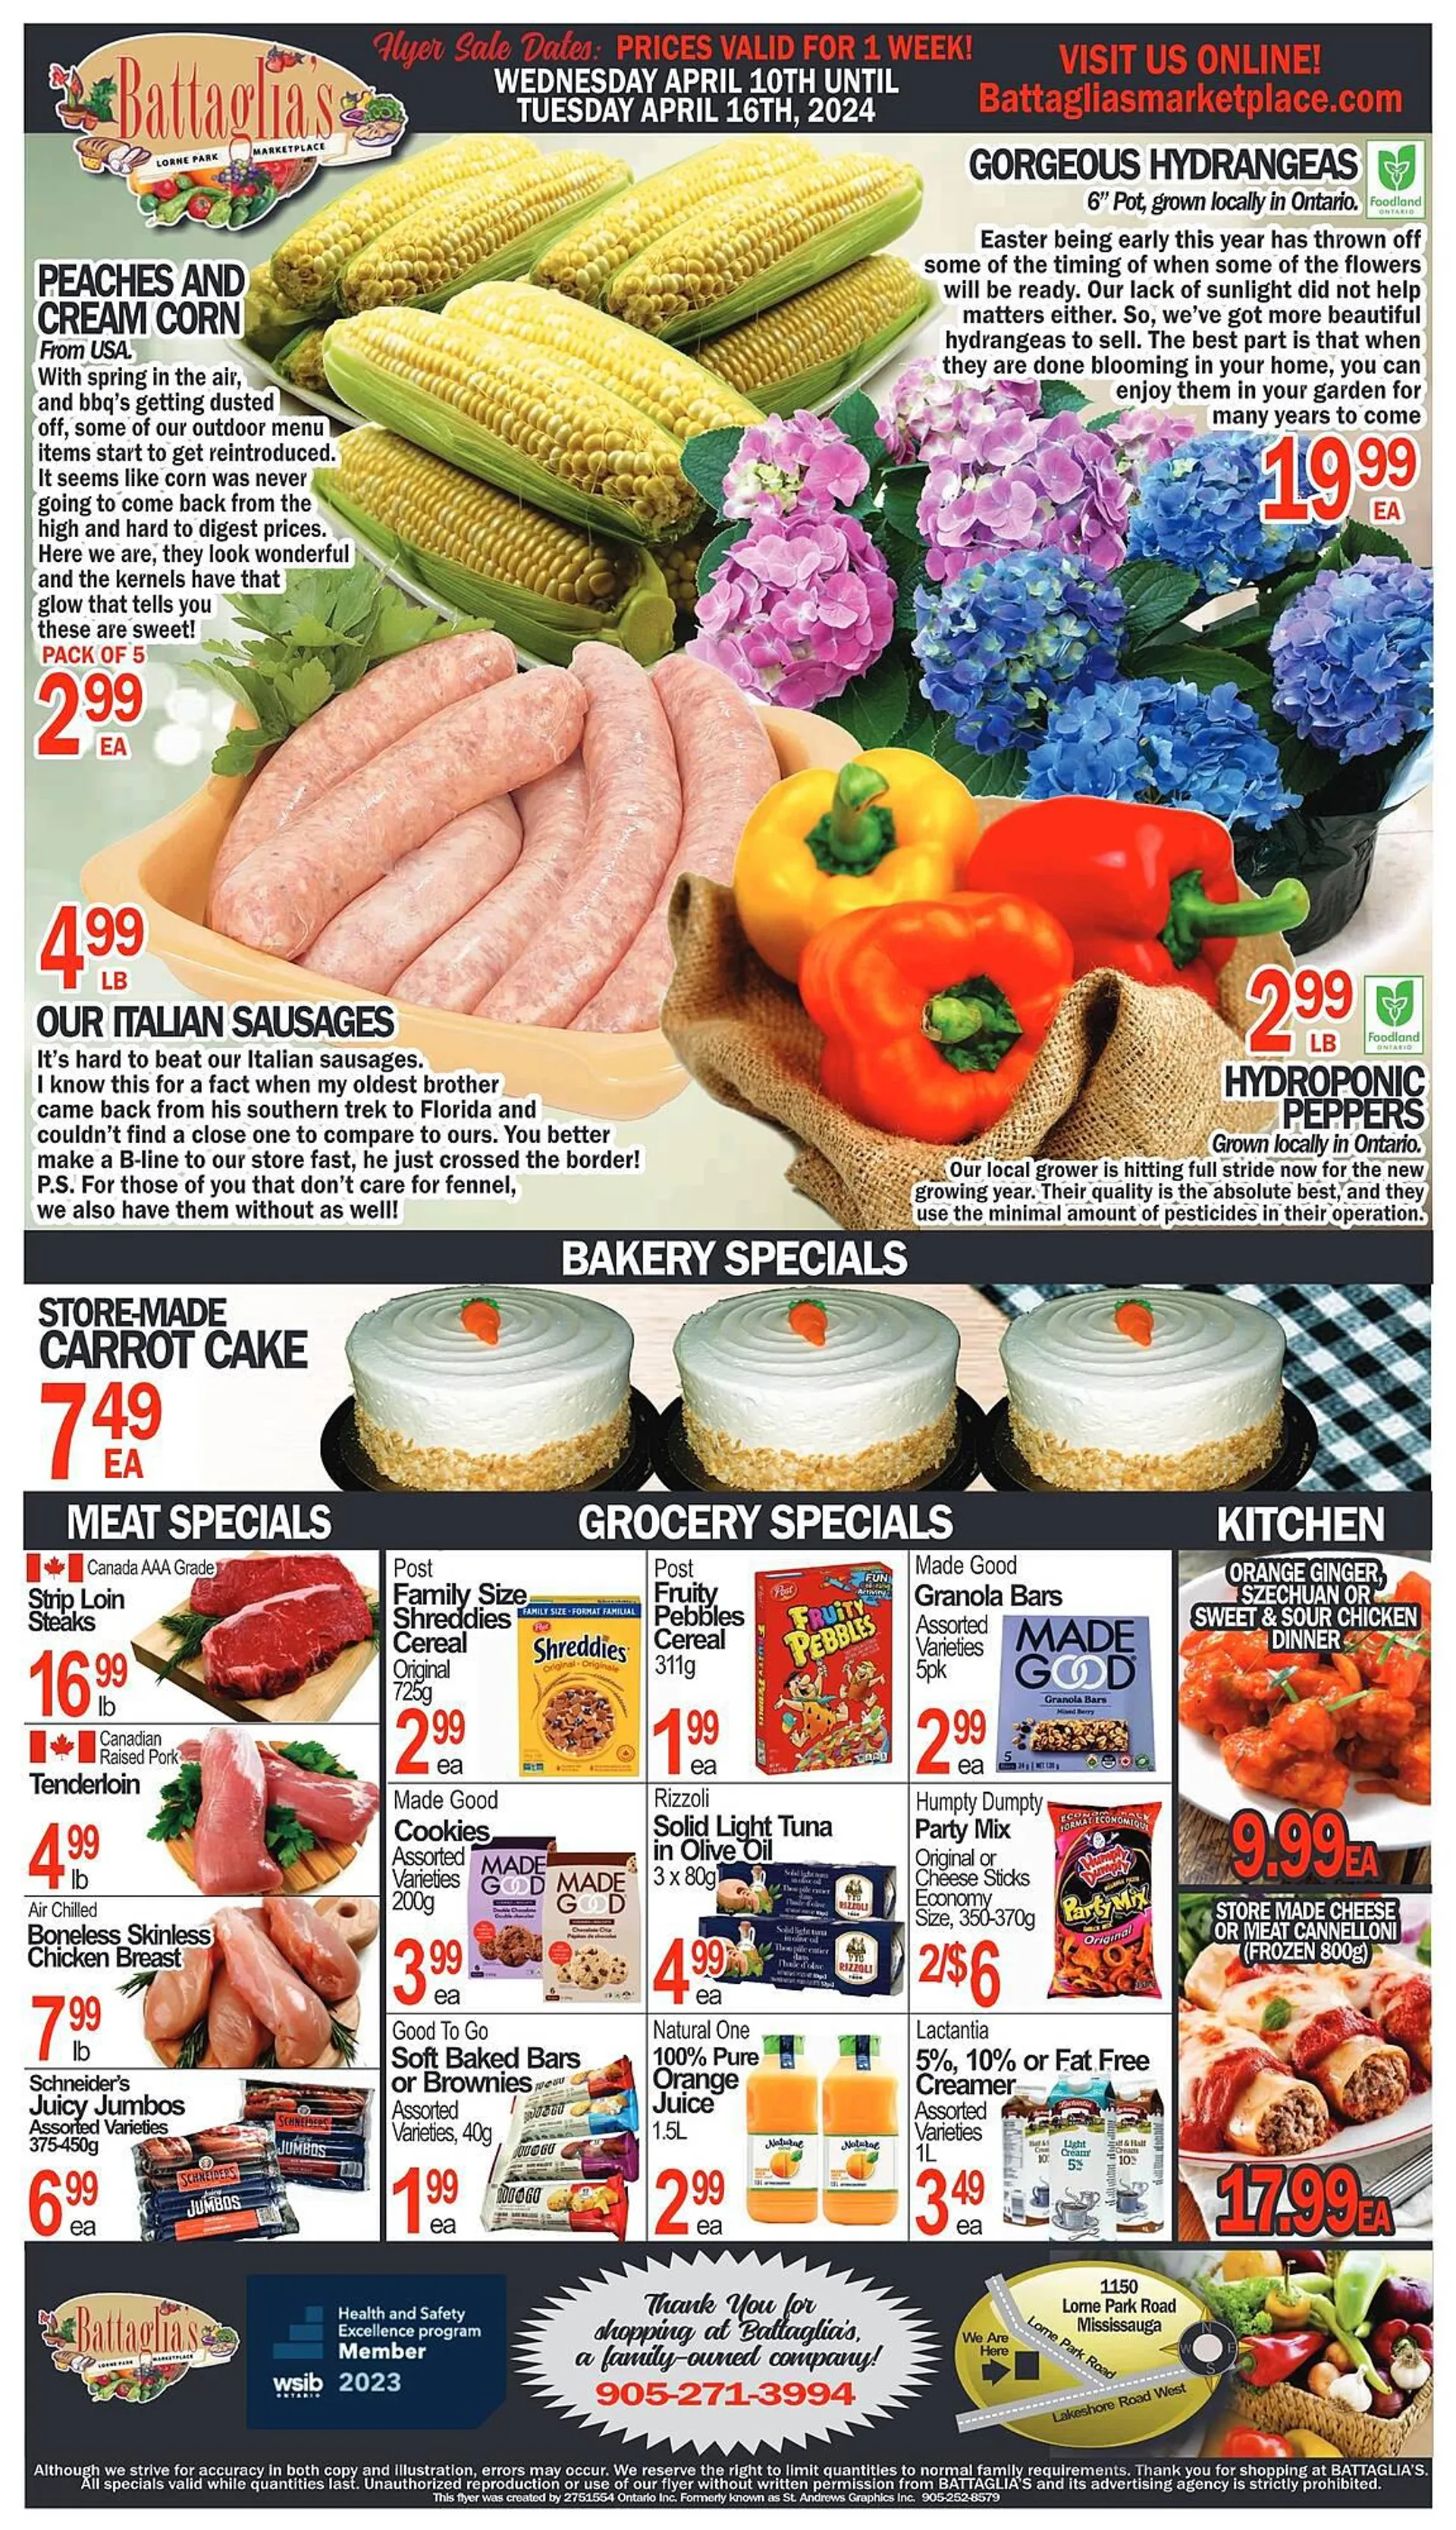 Battaglia's Marketplace flyer from April 10 to April 23 2024 - flyer page 